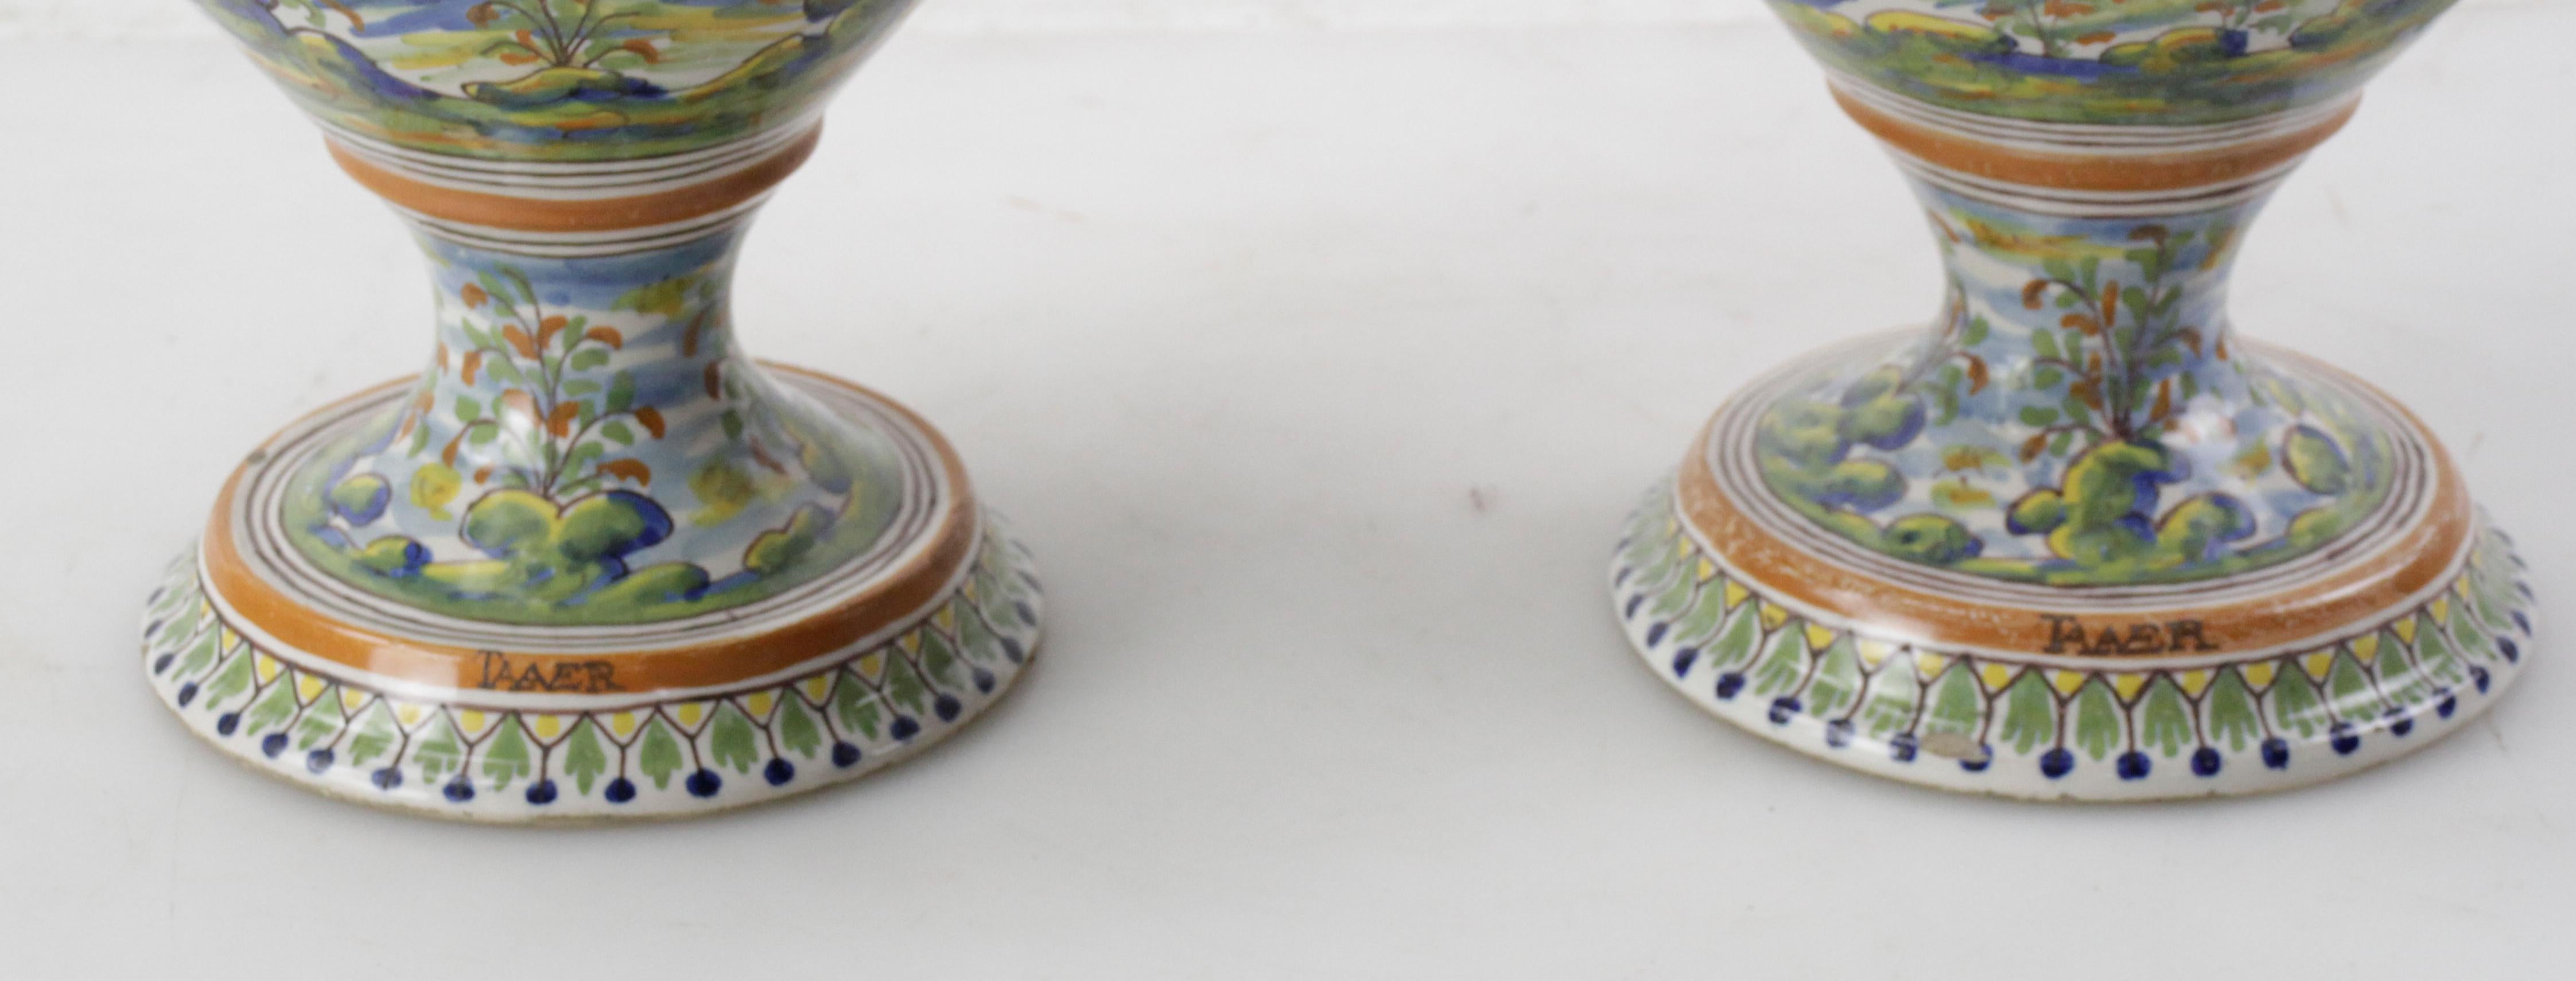 Pair of Antique Italian Majolica Italian Blue and Green Two Handled Urns  For Sale 3